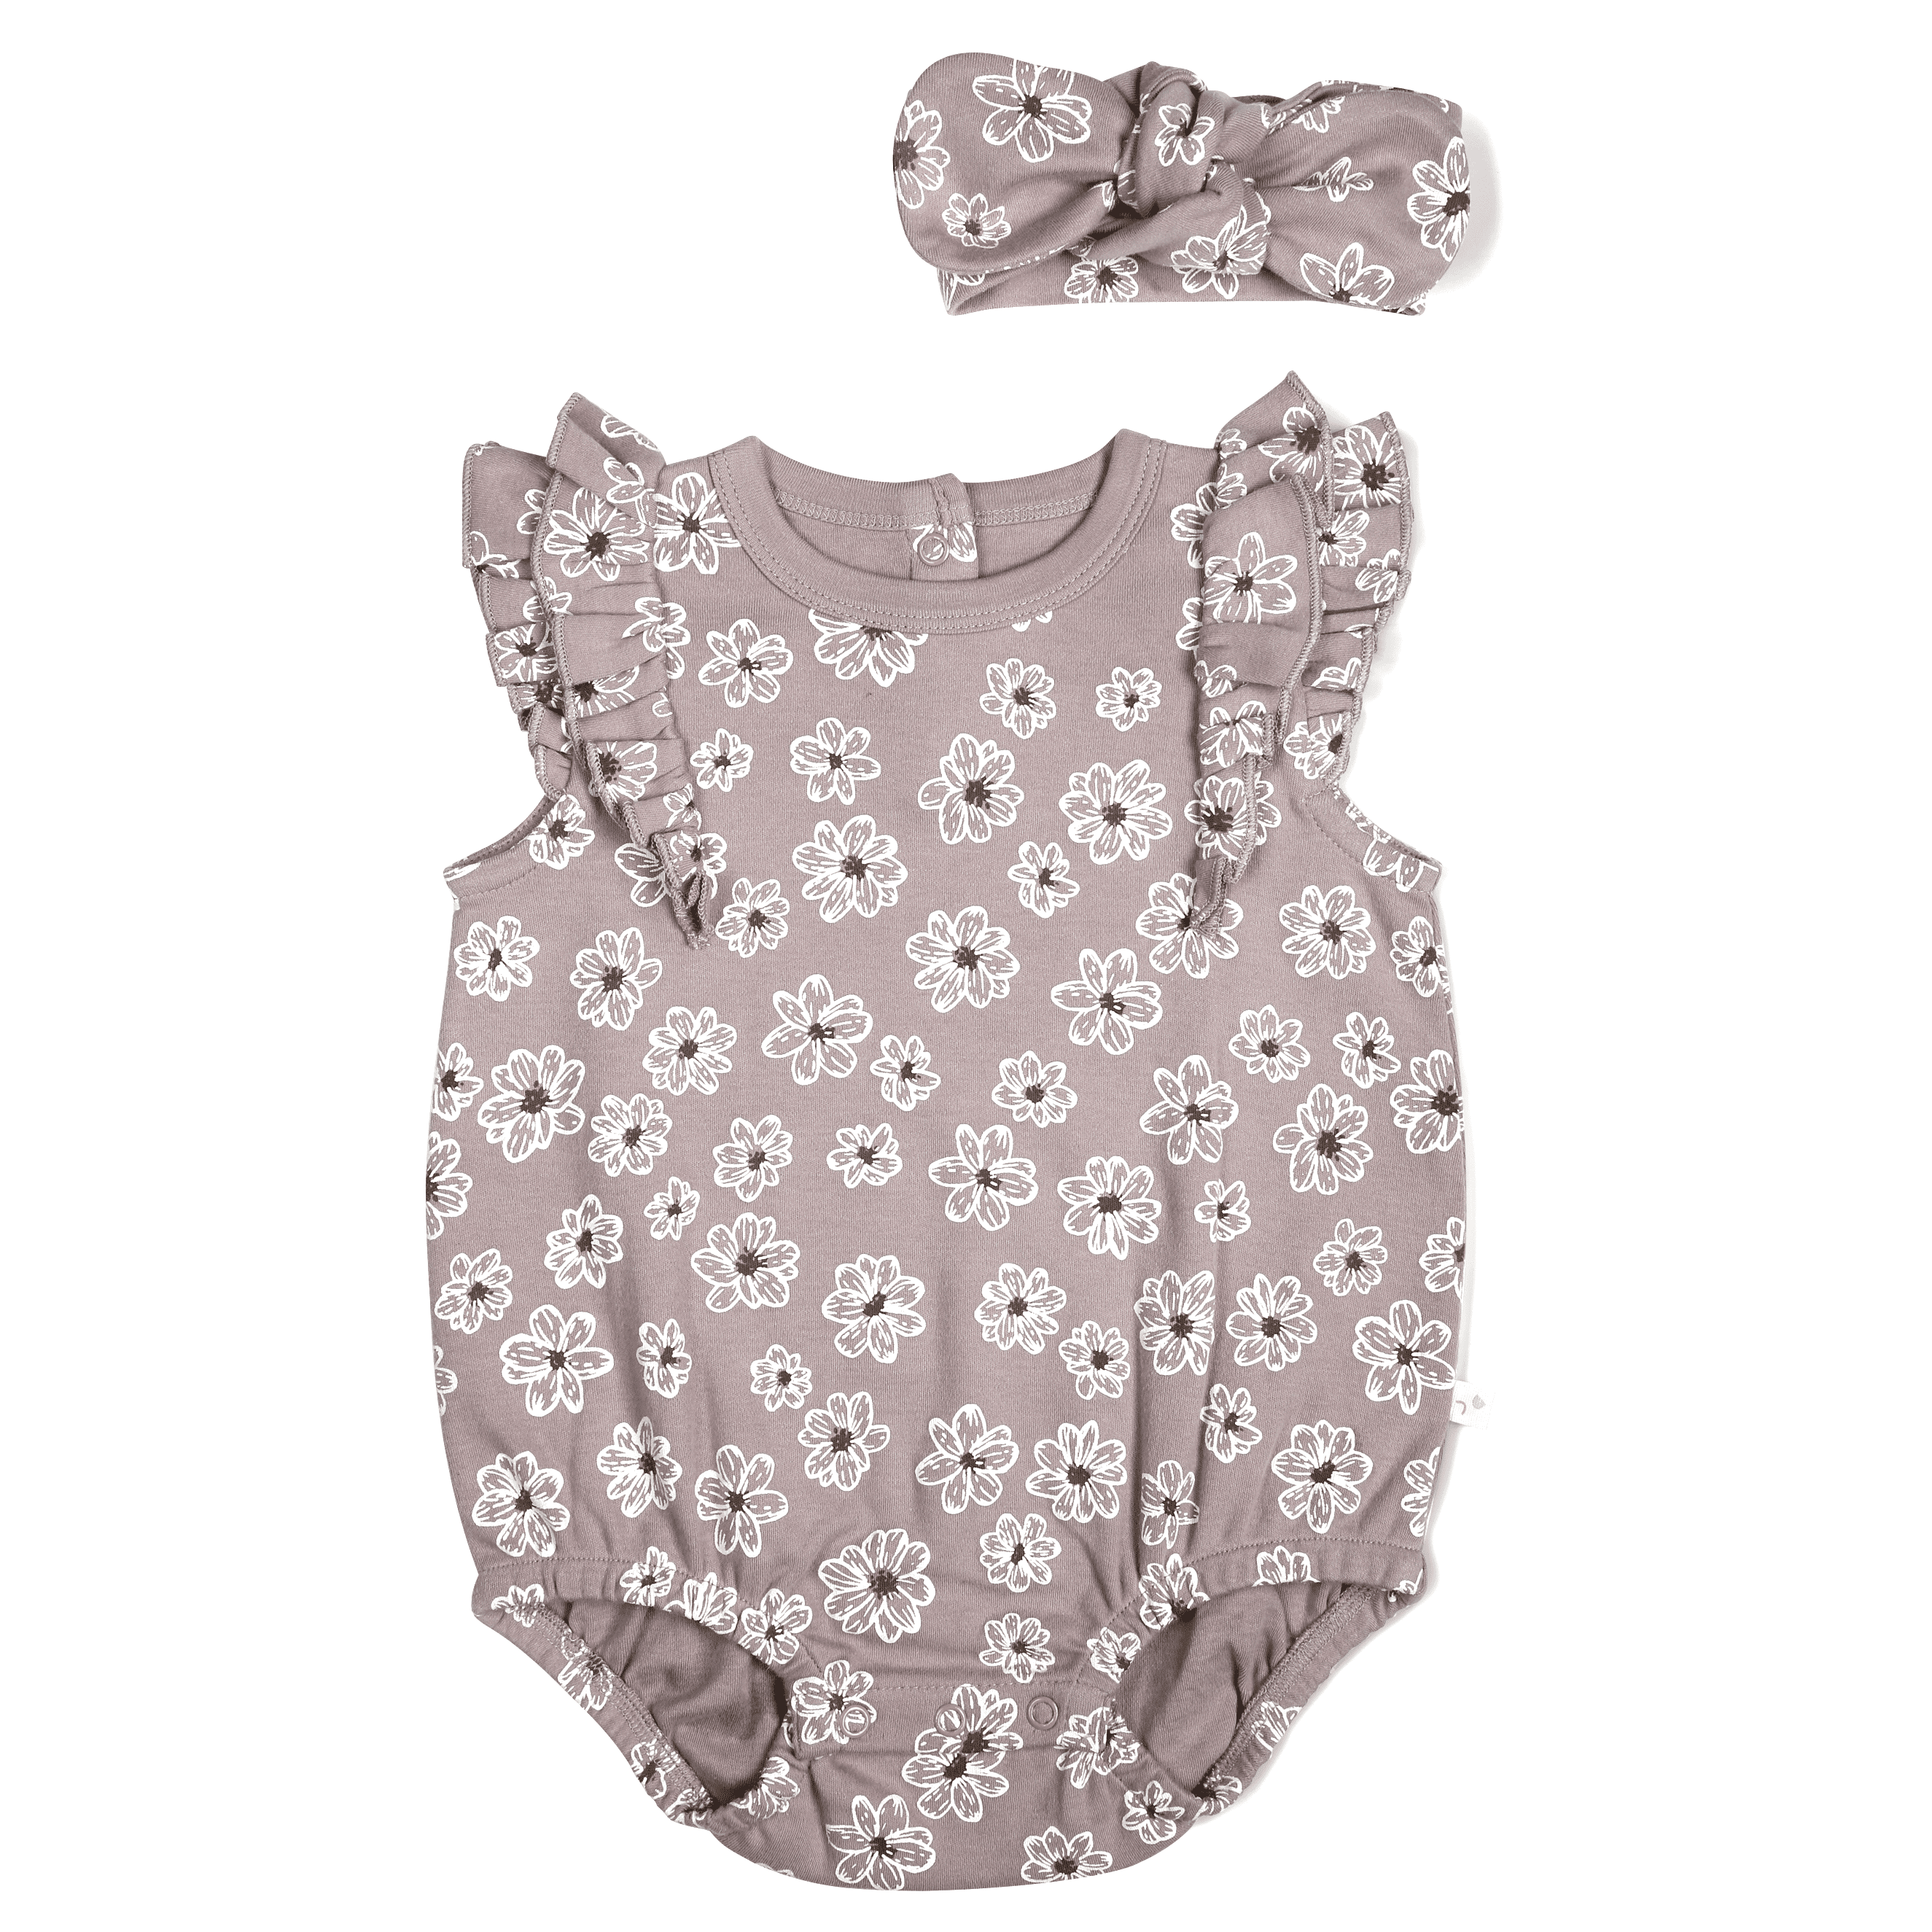 A toddler's Organic Flutter Bubble Onesie in Daisies by Makemake Organics, in mauve with ruffle sleeves and matching bow headband, displayed on a white background.